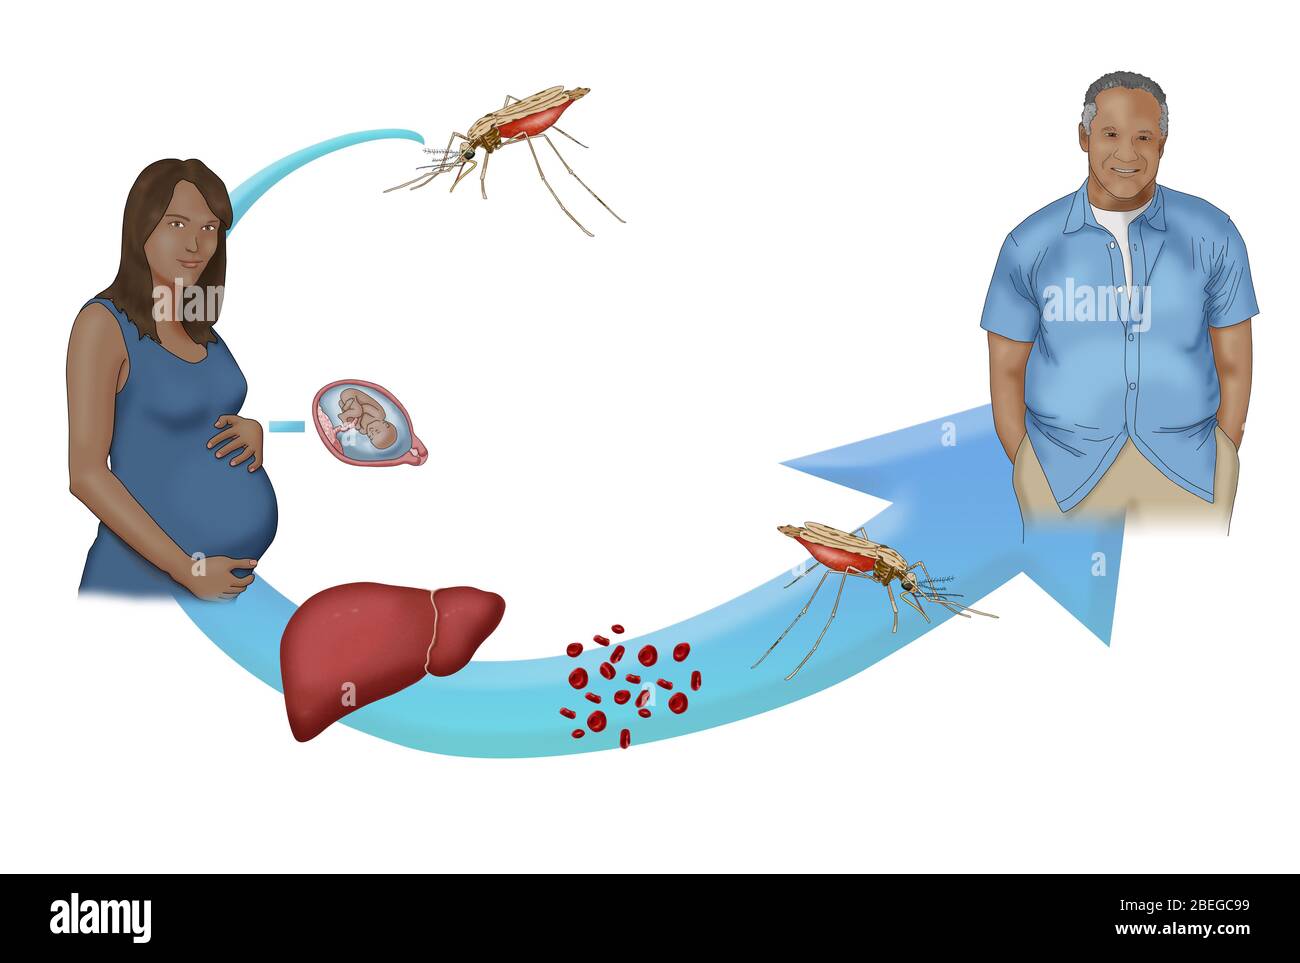 A simplified version of the malaria cycle. Malaria is a vector borne disease transmitted by the Anopheles mosquito bite. Malaria can also be transmitted to an infant during birth if the mother is infected. Mosquitos acquire the malaria parasite by biting an infected person or animal. Stock Photo